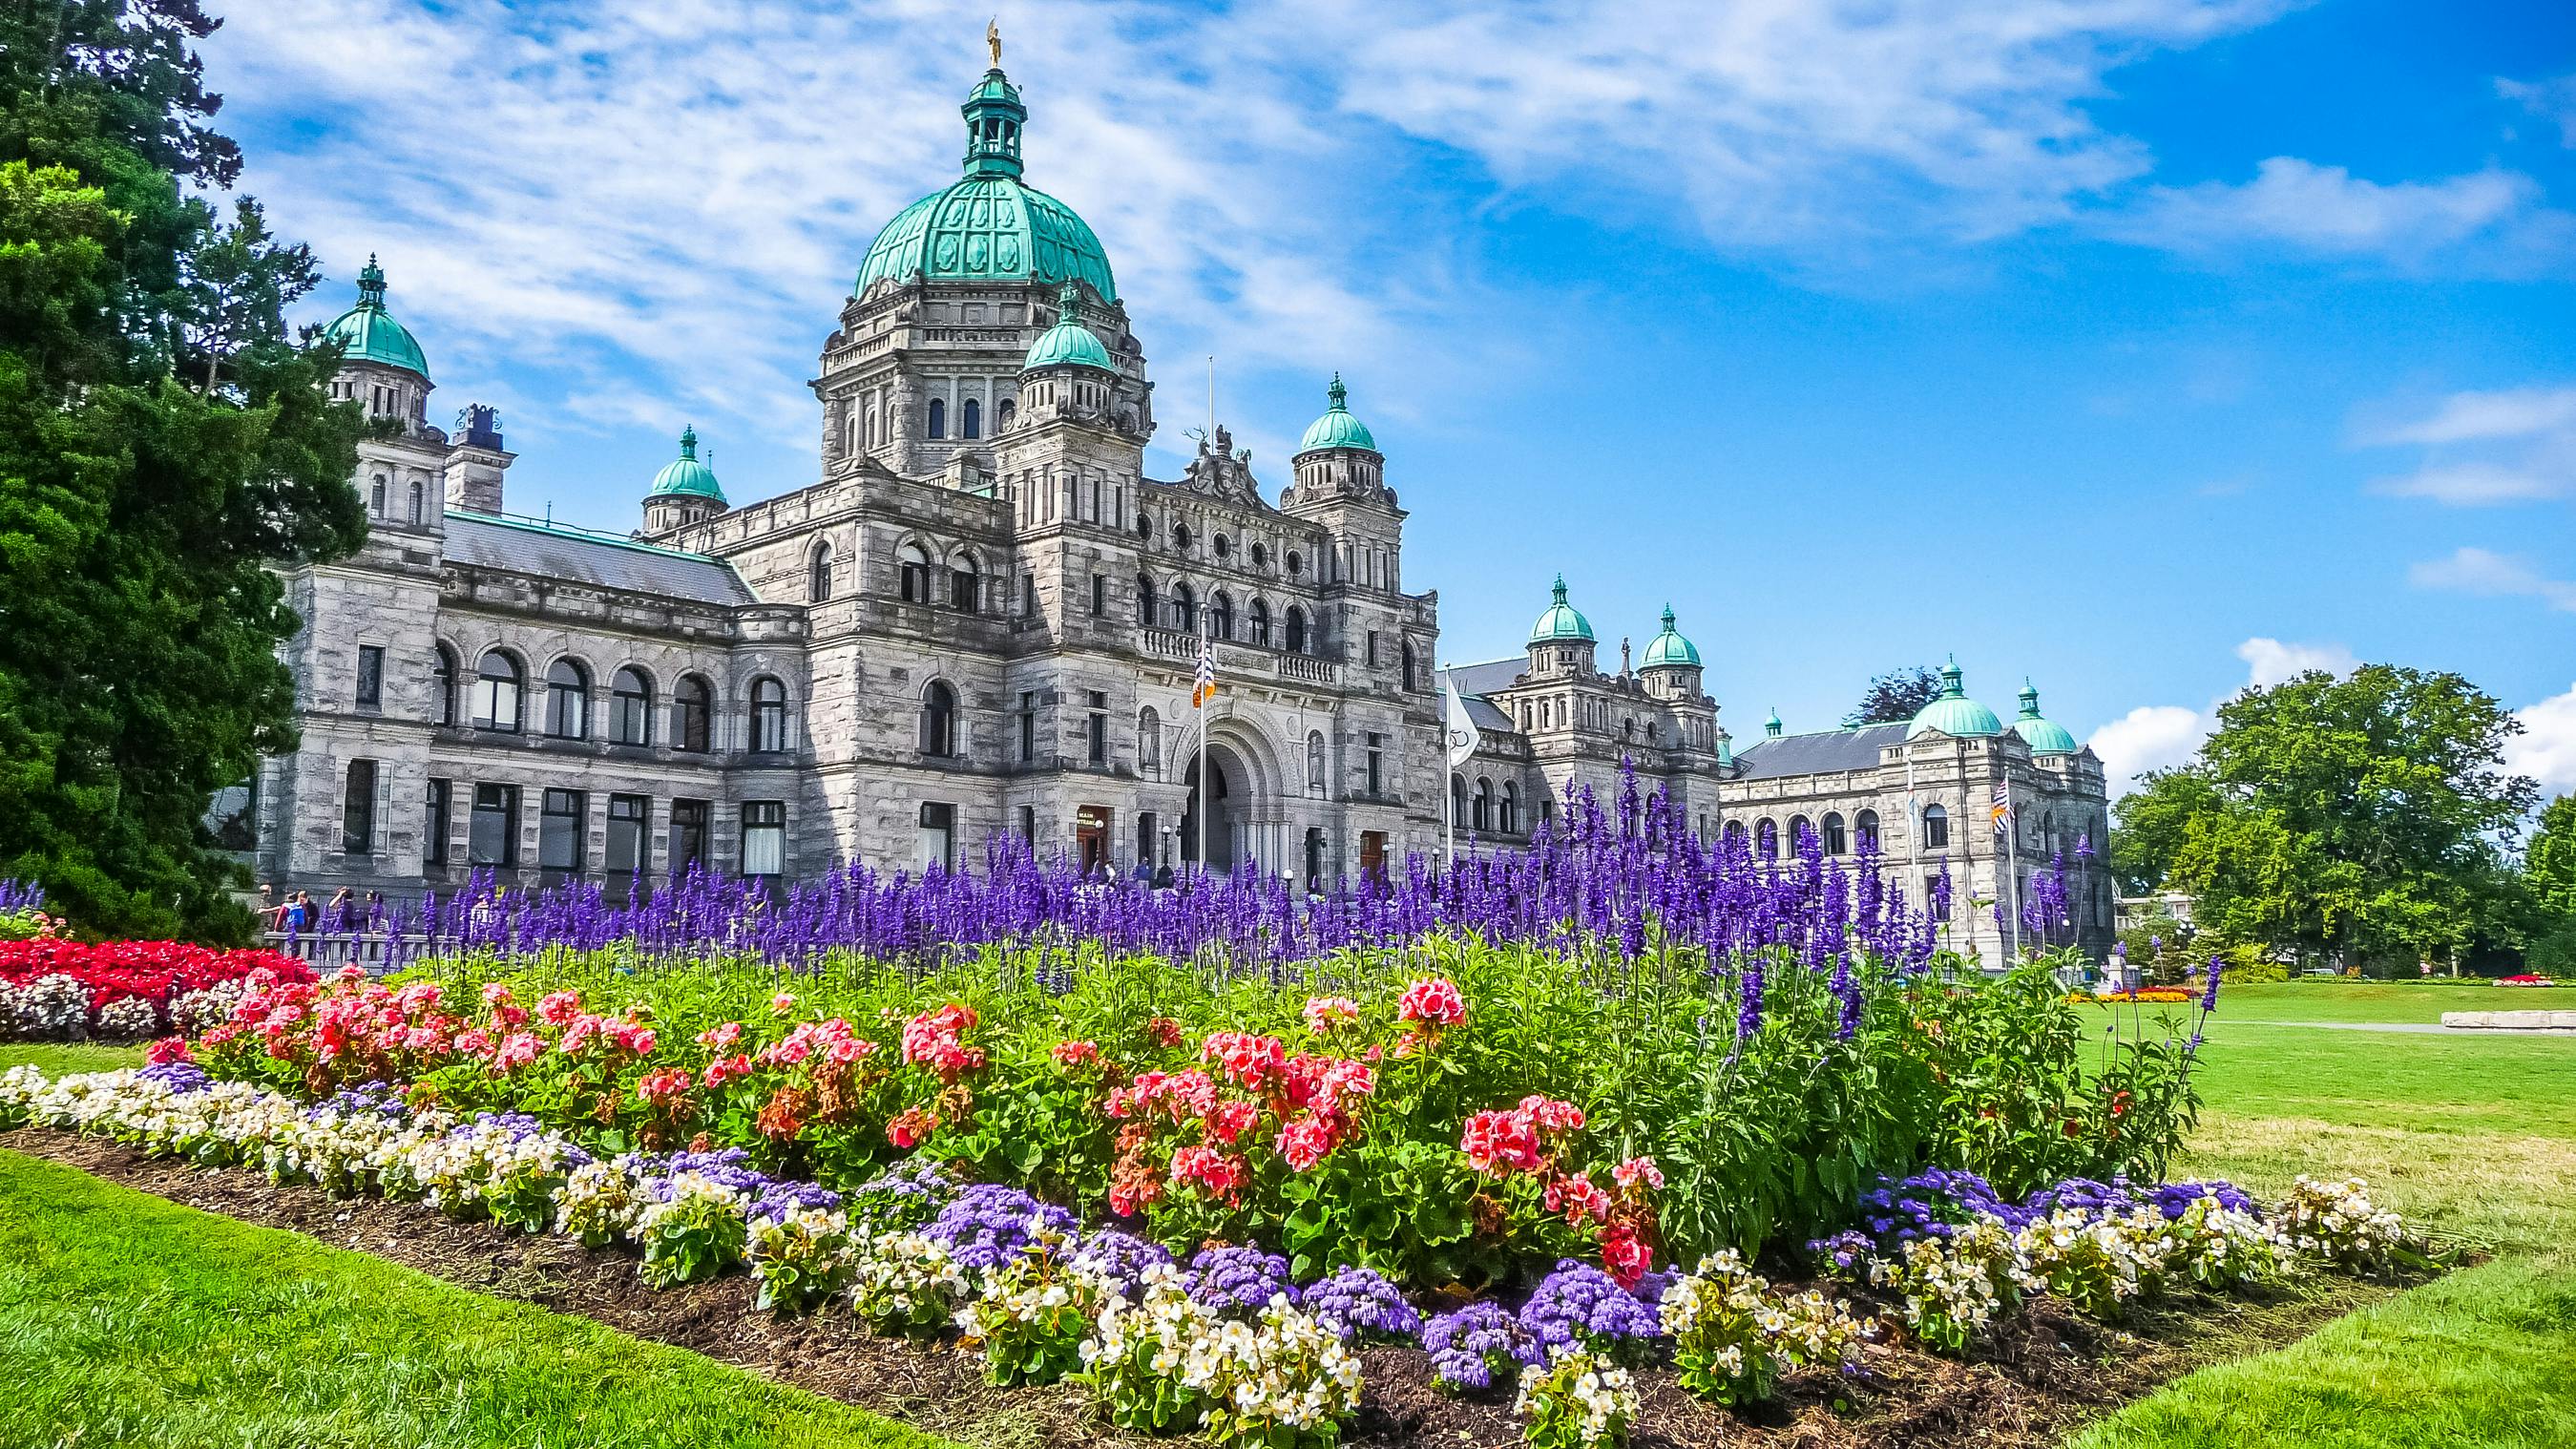 Self-guided walking tour of Downtown Victoria